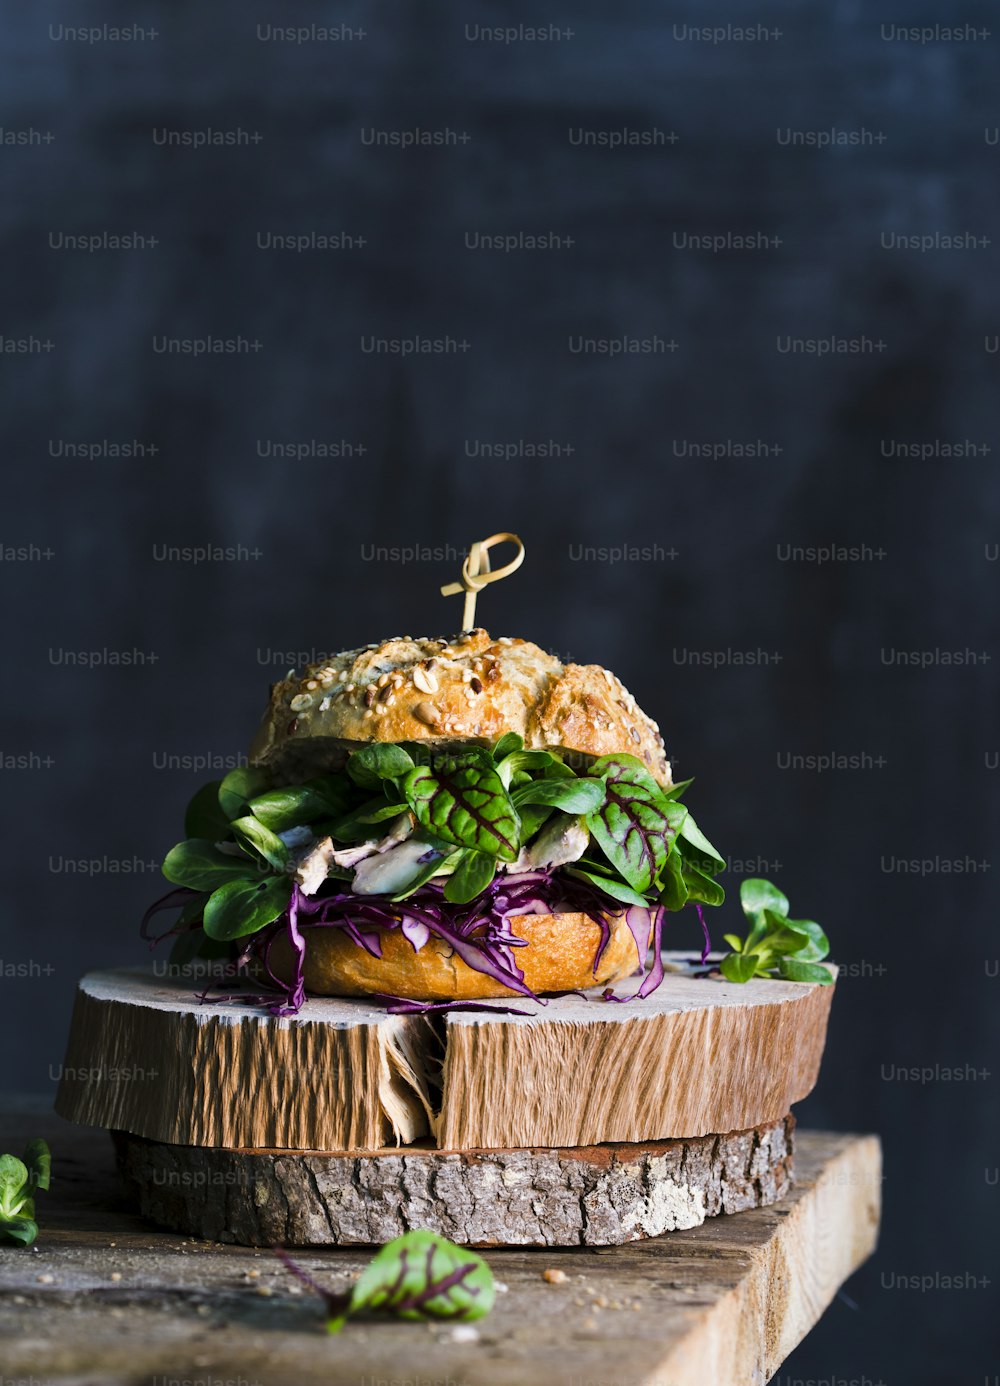 a sandwich with lettuce, tomato, and onion on a wooden board